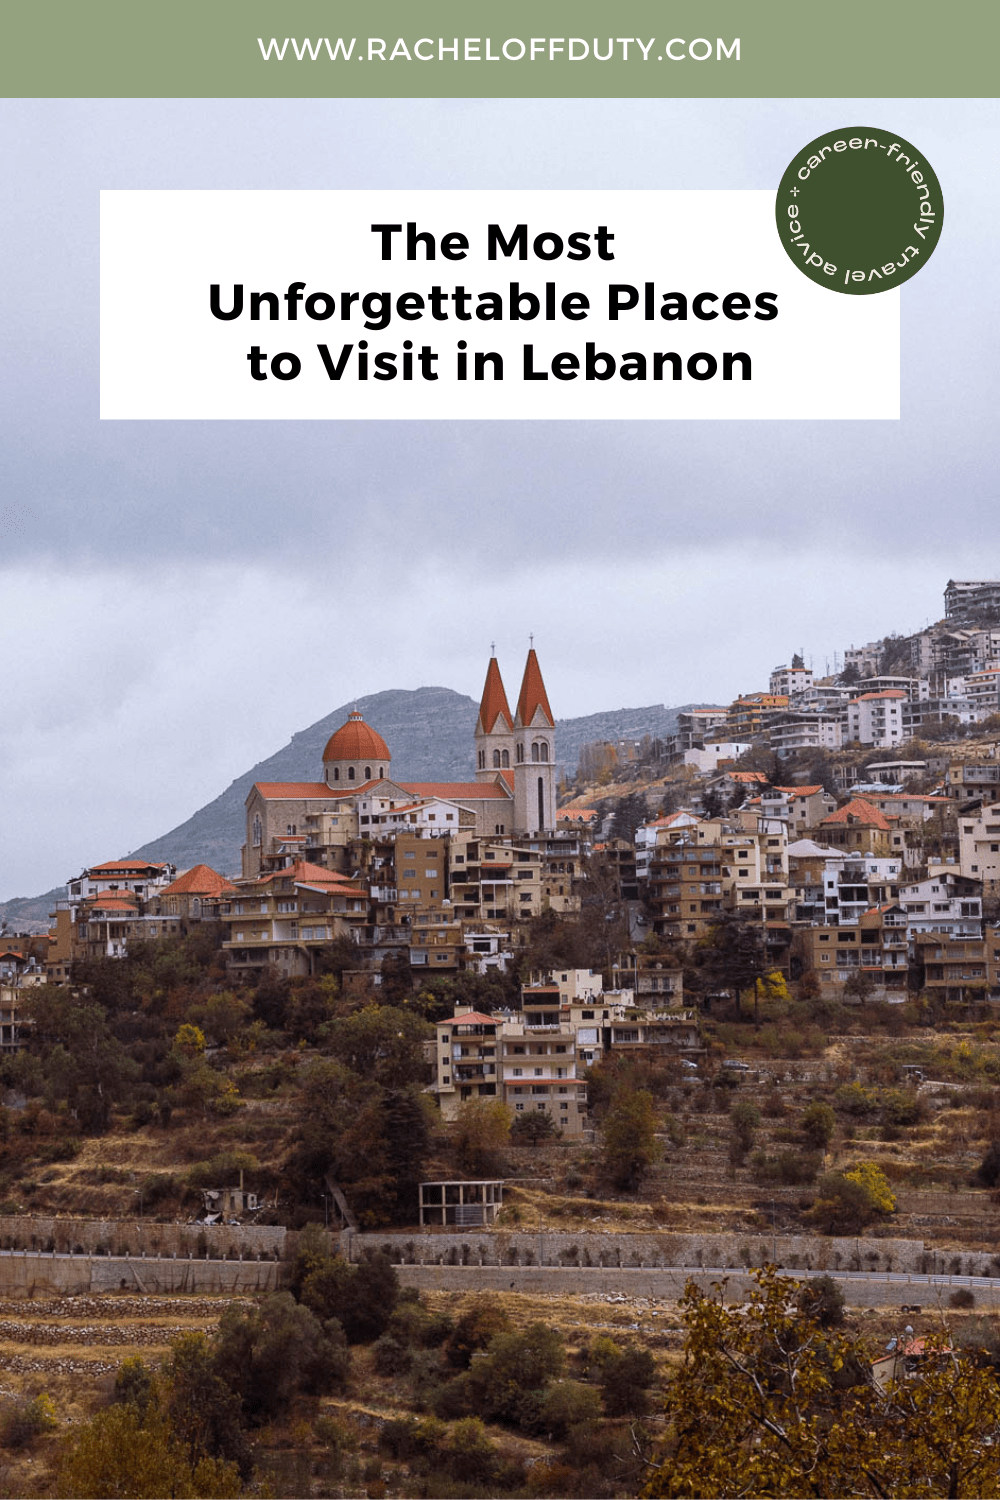 The Most Unforgettable Places to Visit in Lebanon - Rachel Off Duty